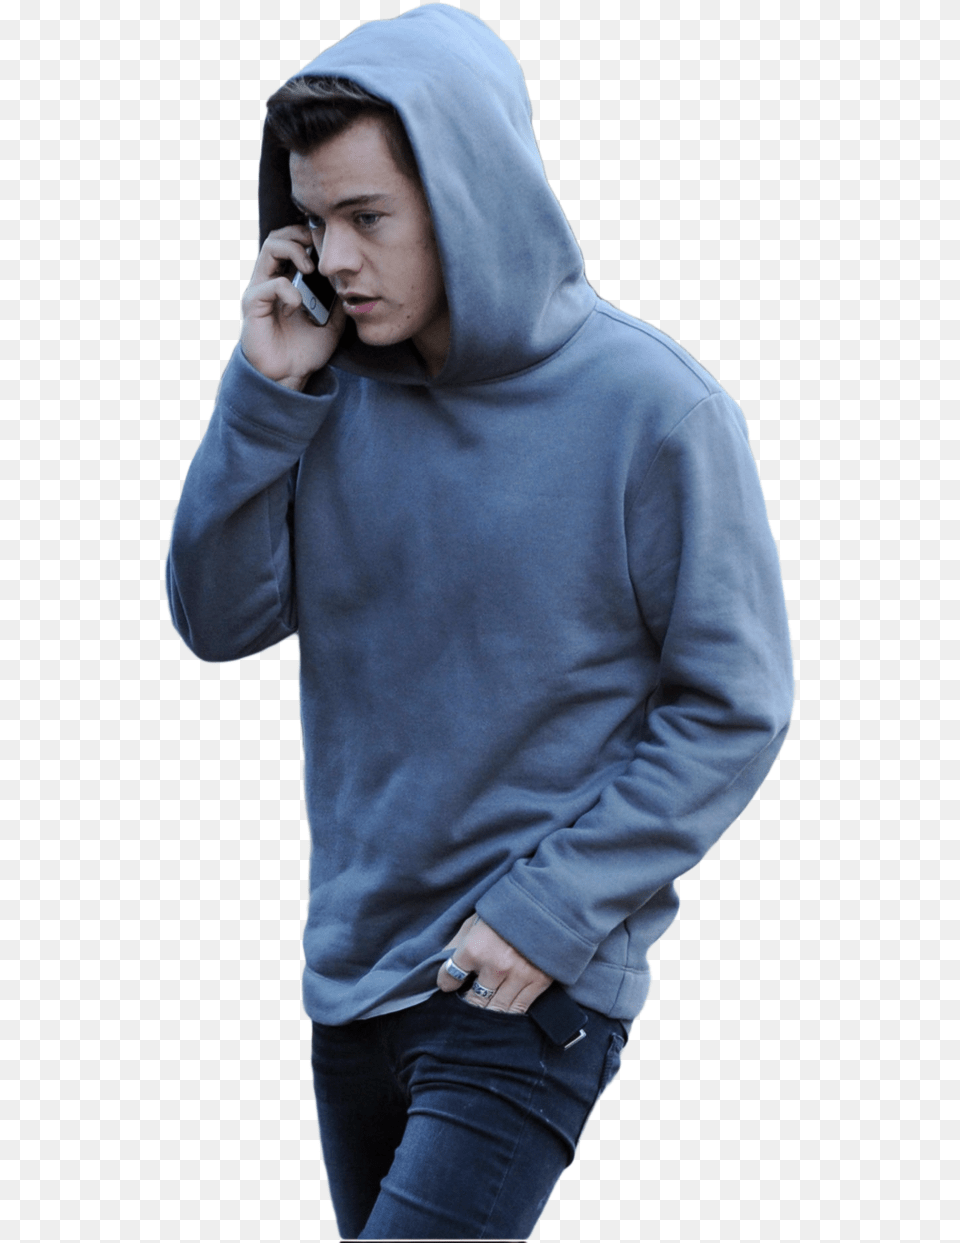 By Nyctophille Harry Styles, Knitwear, Clothing, Sweatshirt, Sweater Png Image